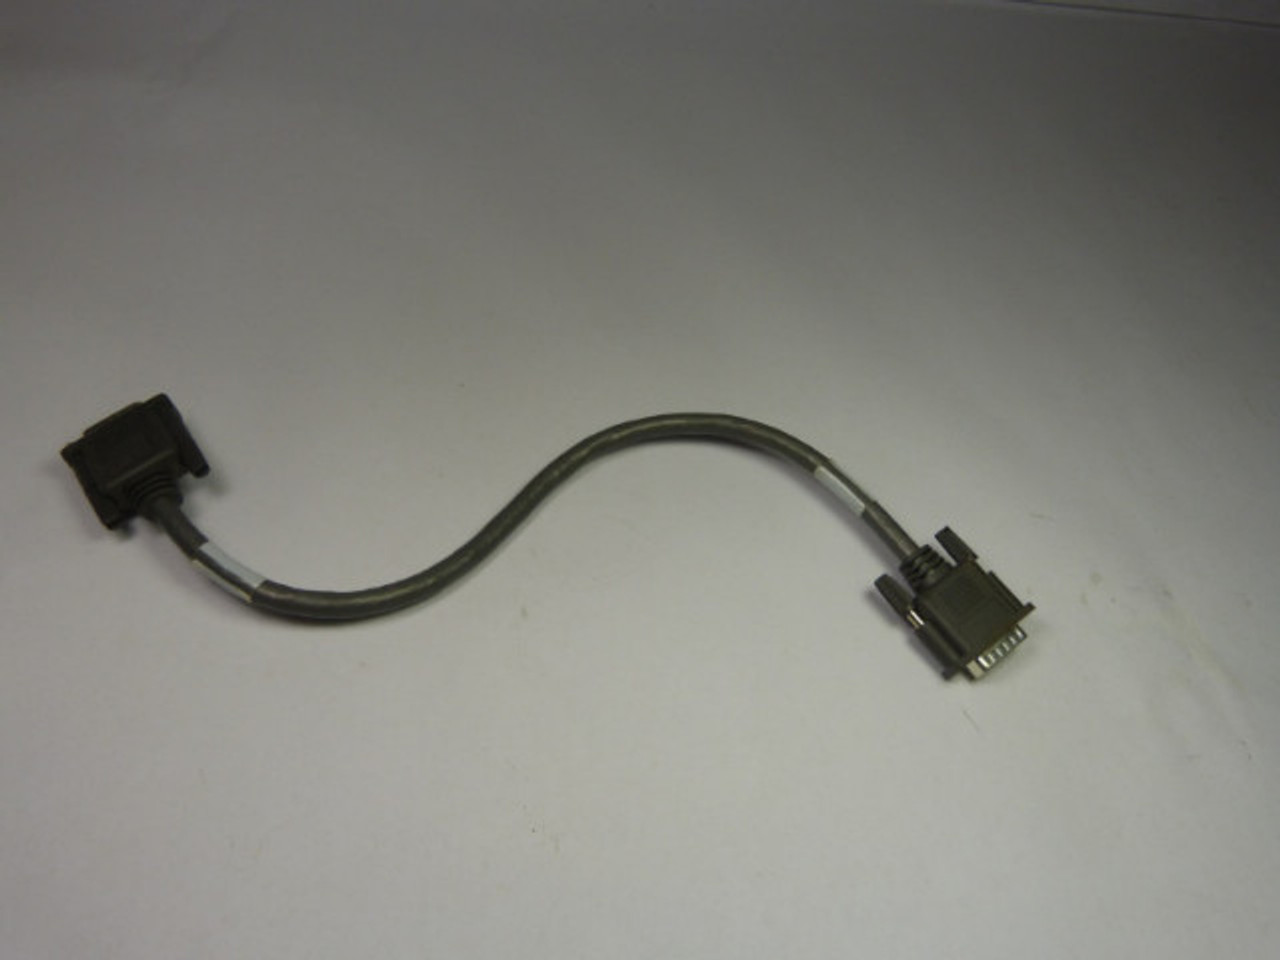 Asymtek 06-2170-00 Low Voltage Computer Cable USED